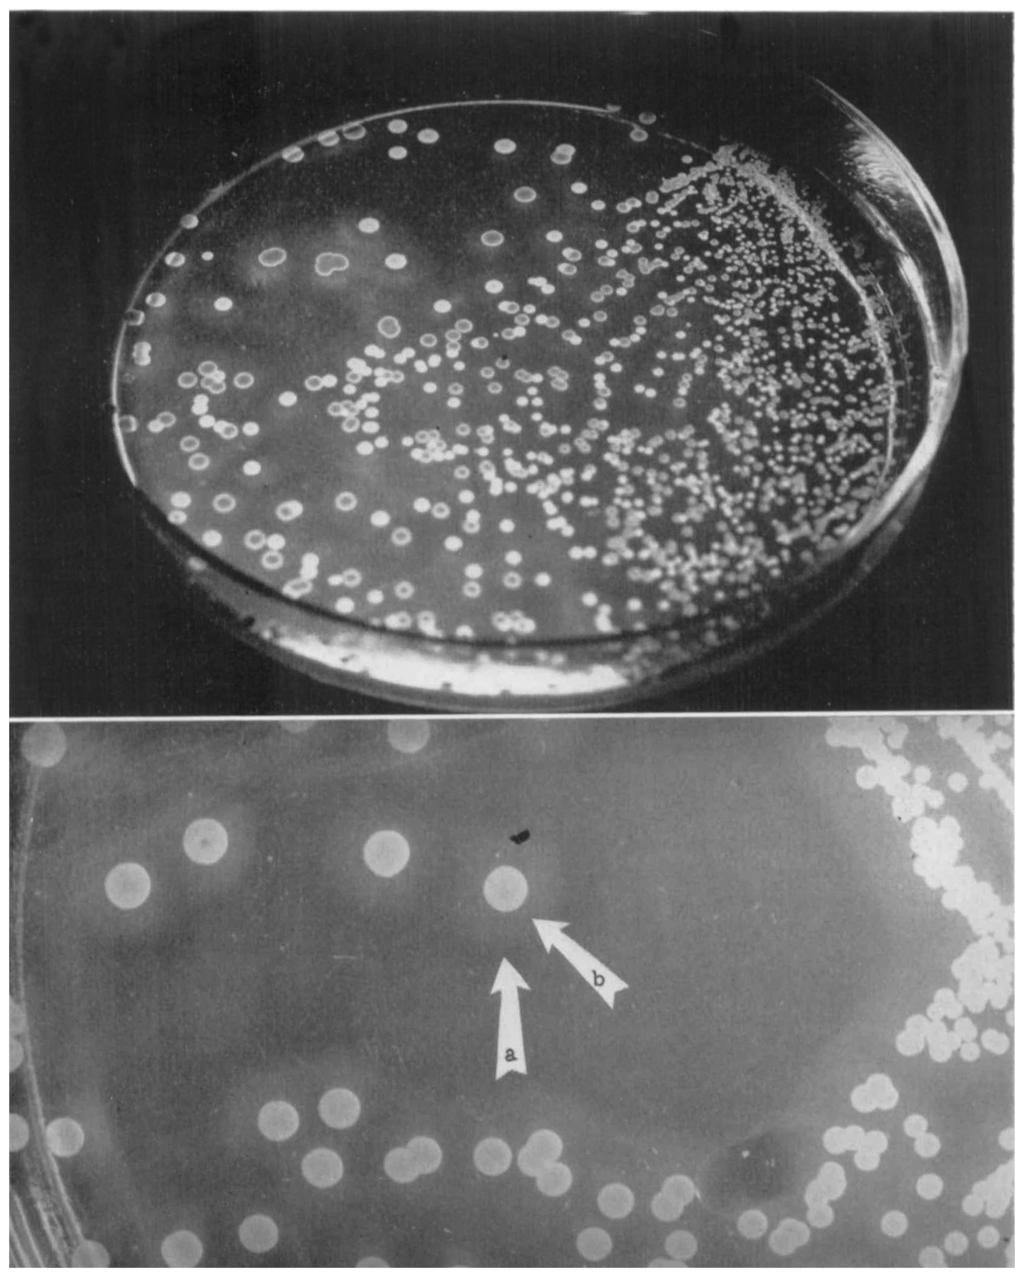 aureus surrounded by white coagulase-negative organisms. Precipitate appears around the pigmented colonies. White colonics close to <S.